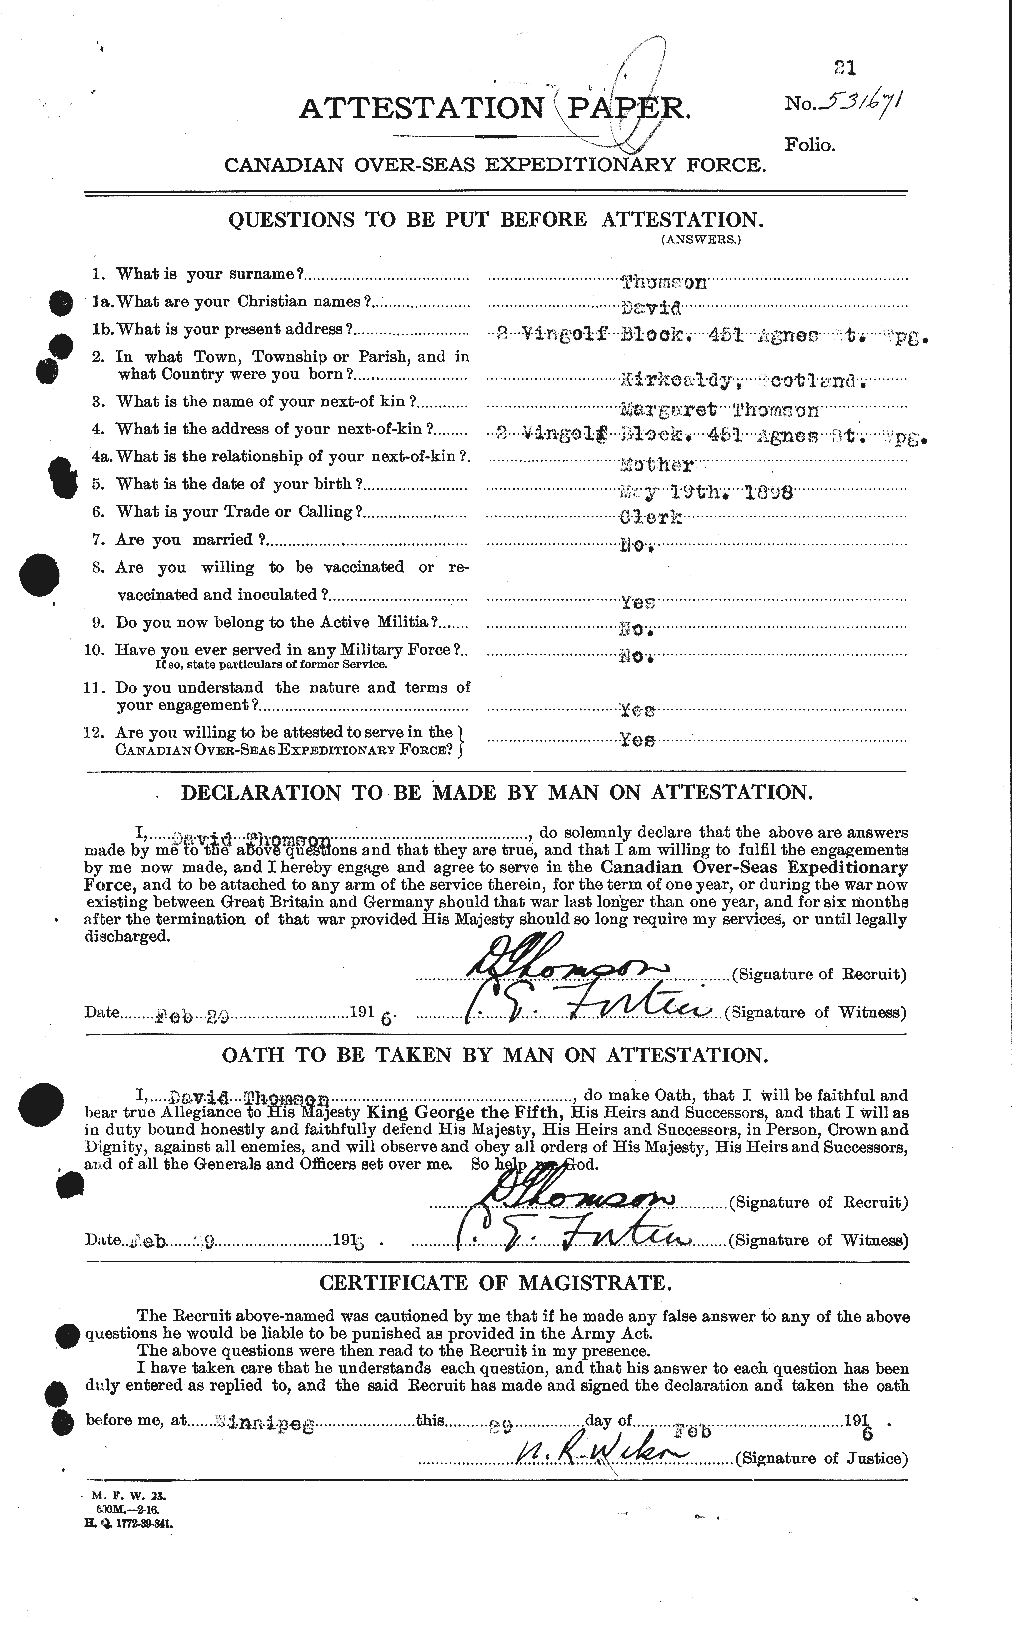 Personnel Records of the First World War - CEF 633617a